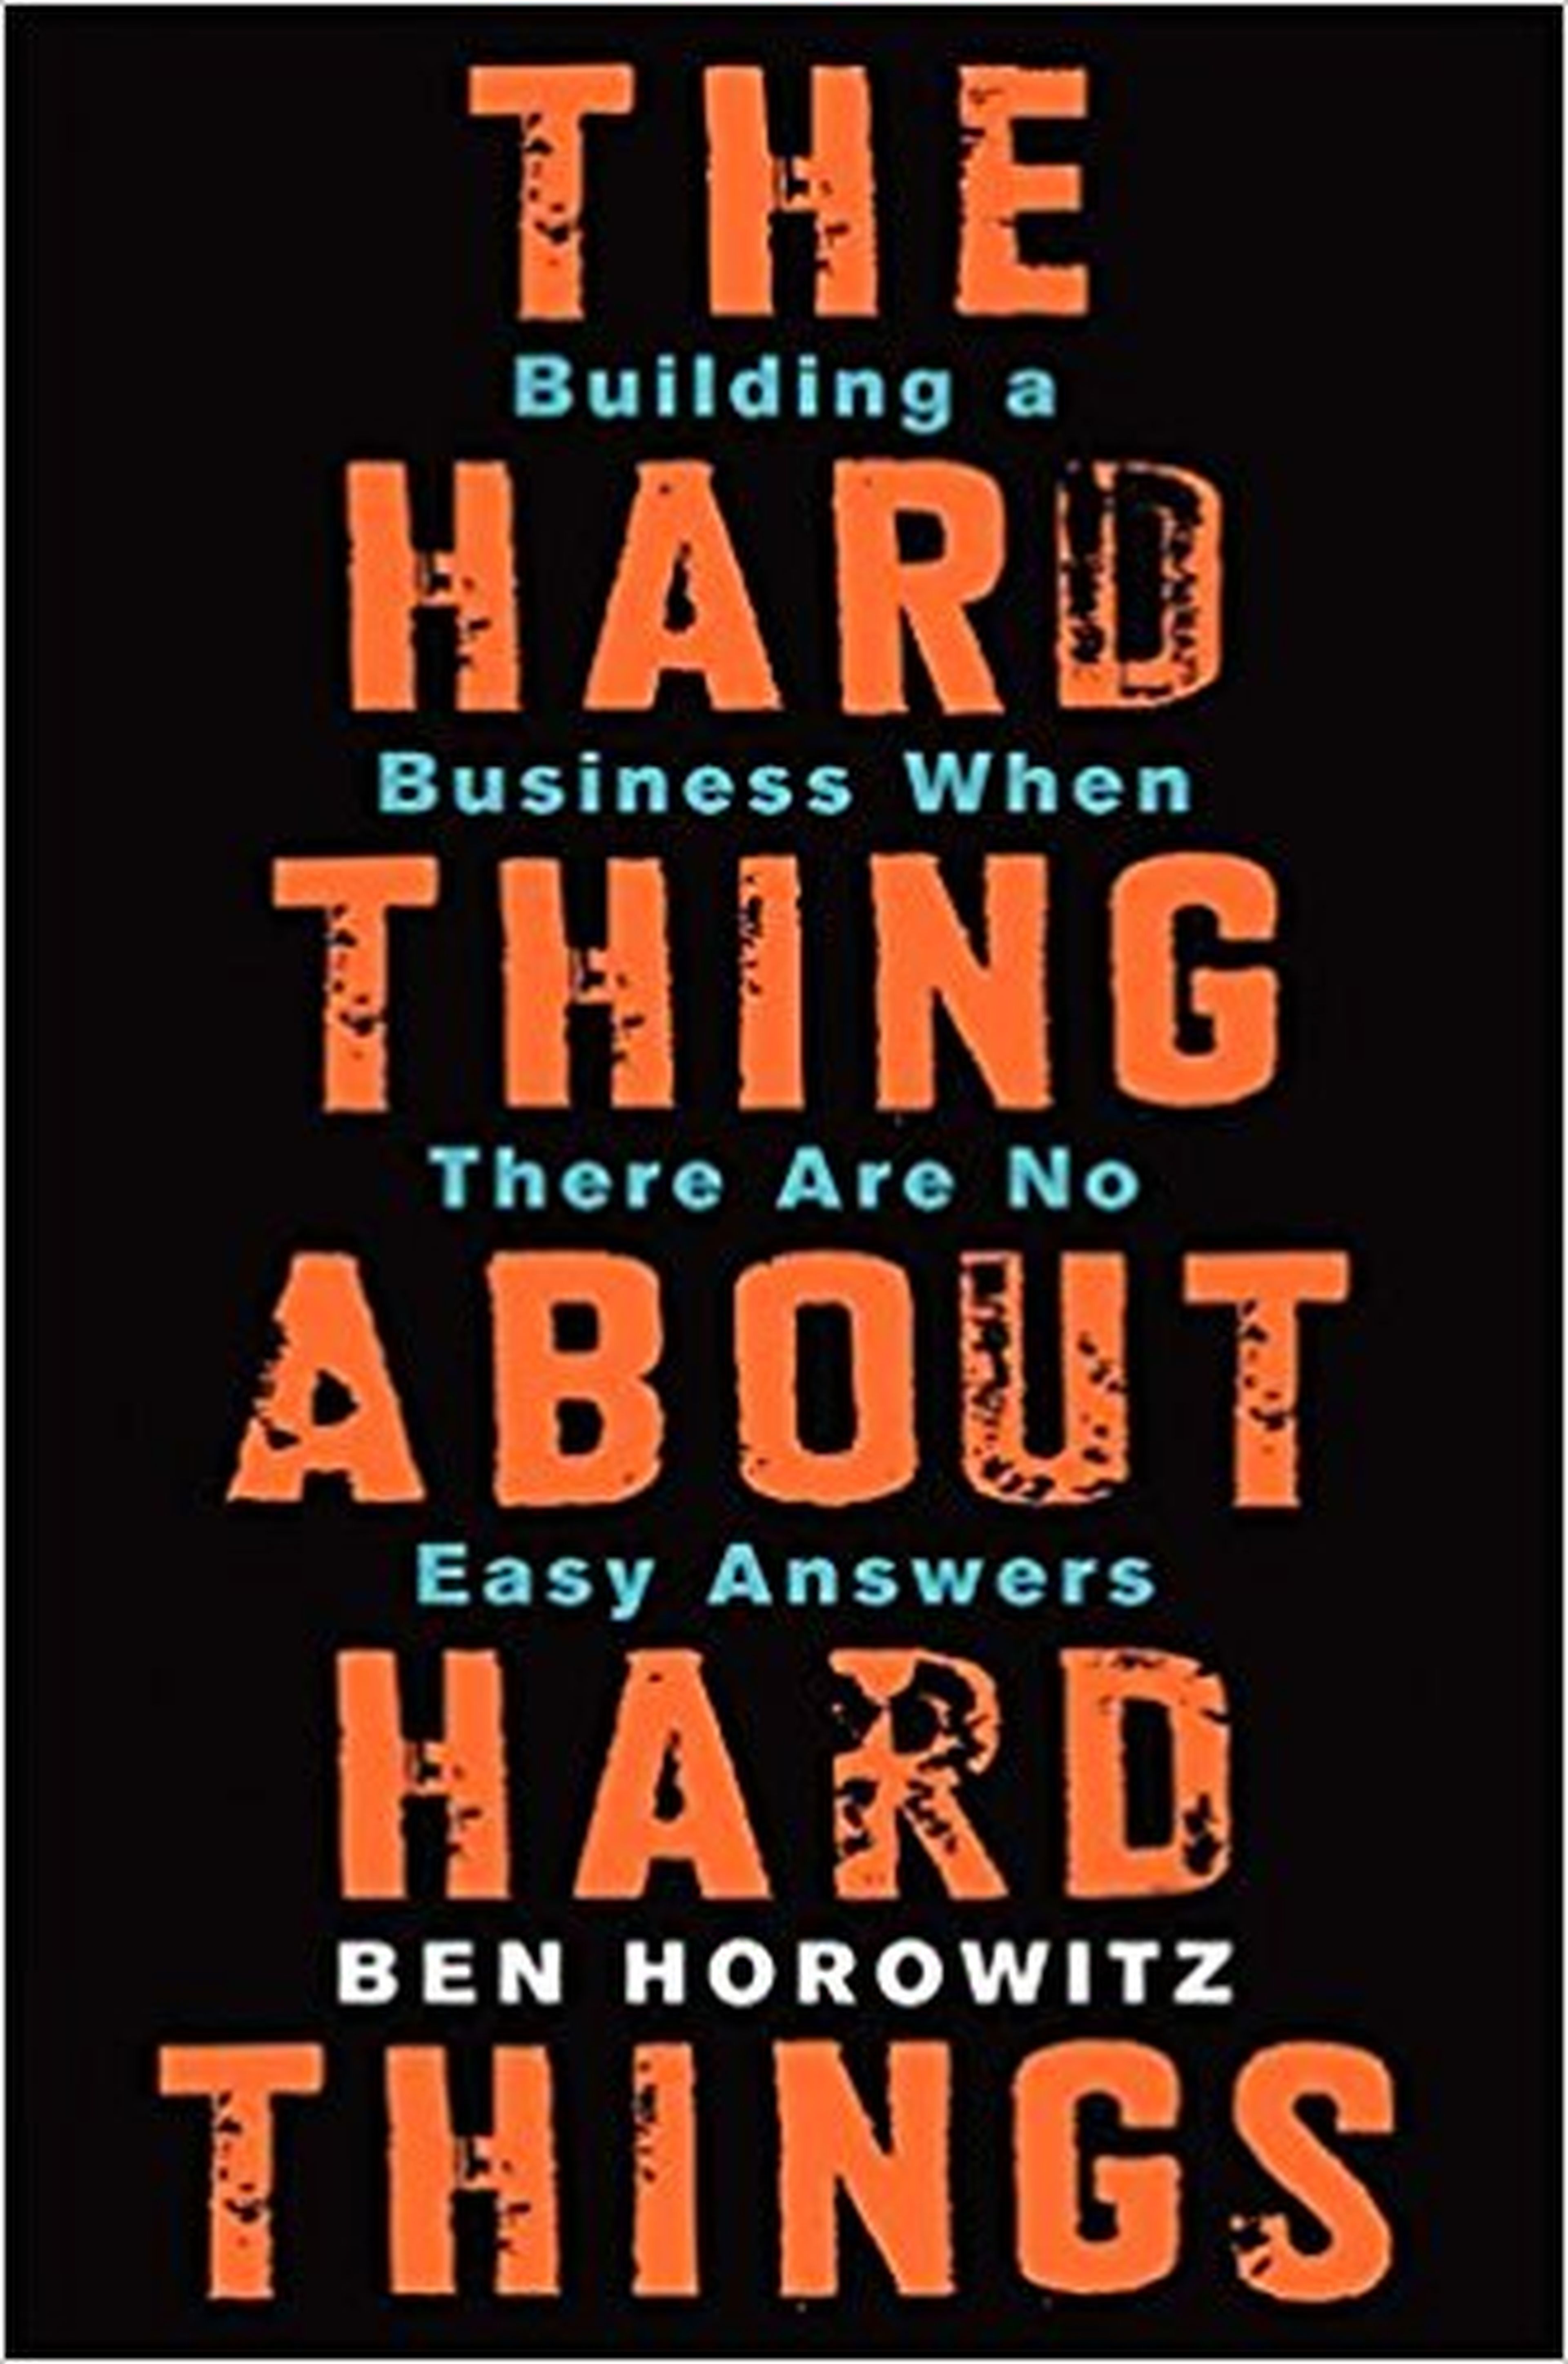 "The Hard Thing About Hard Things: Building a Business When There Are No Easy Answers" - Ben Horowitz